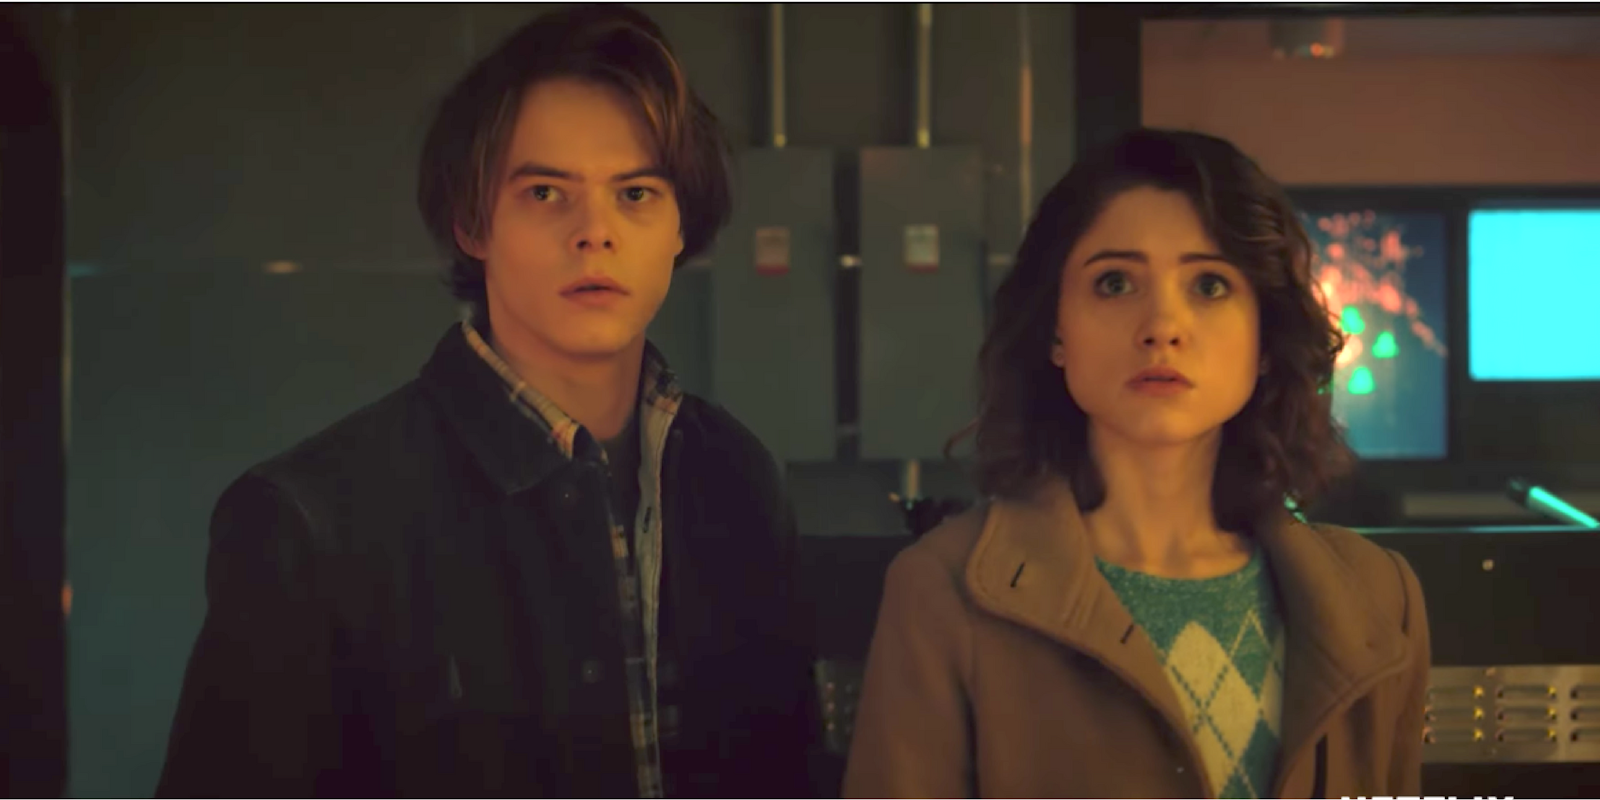 A scene from the 'Stranger Things' trailer featuring Charlie Heaton